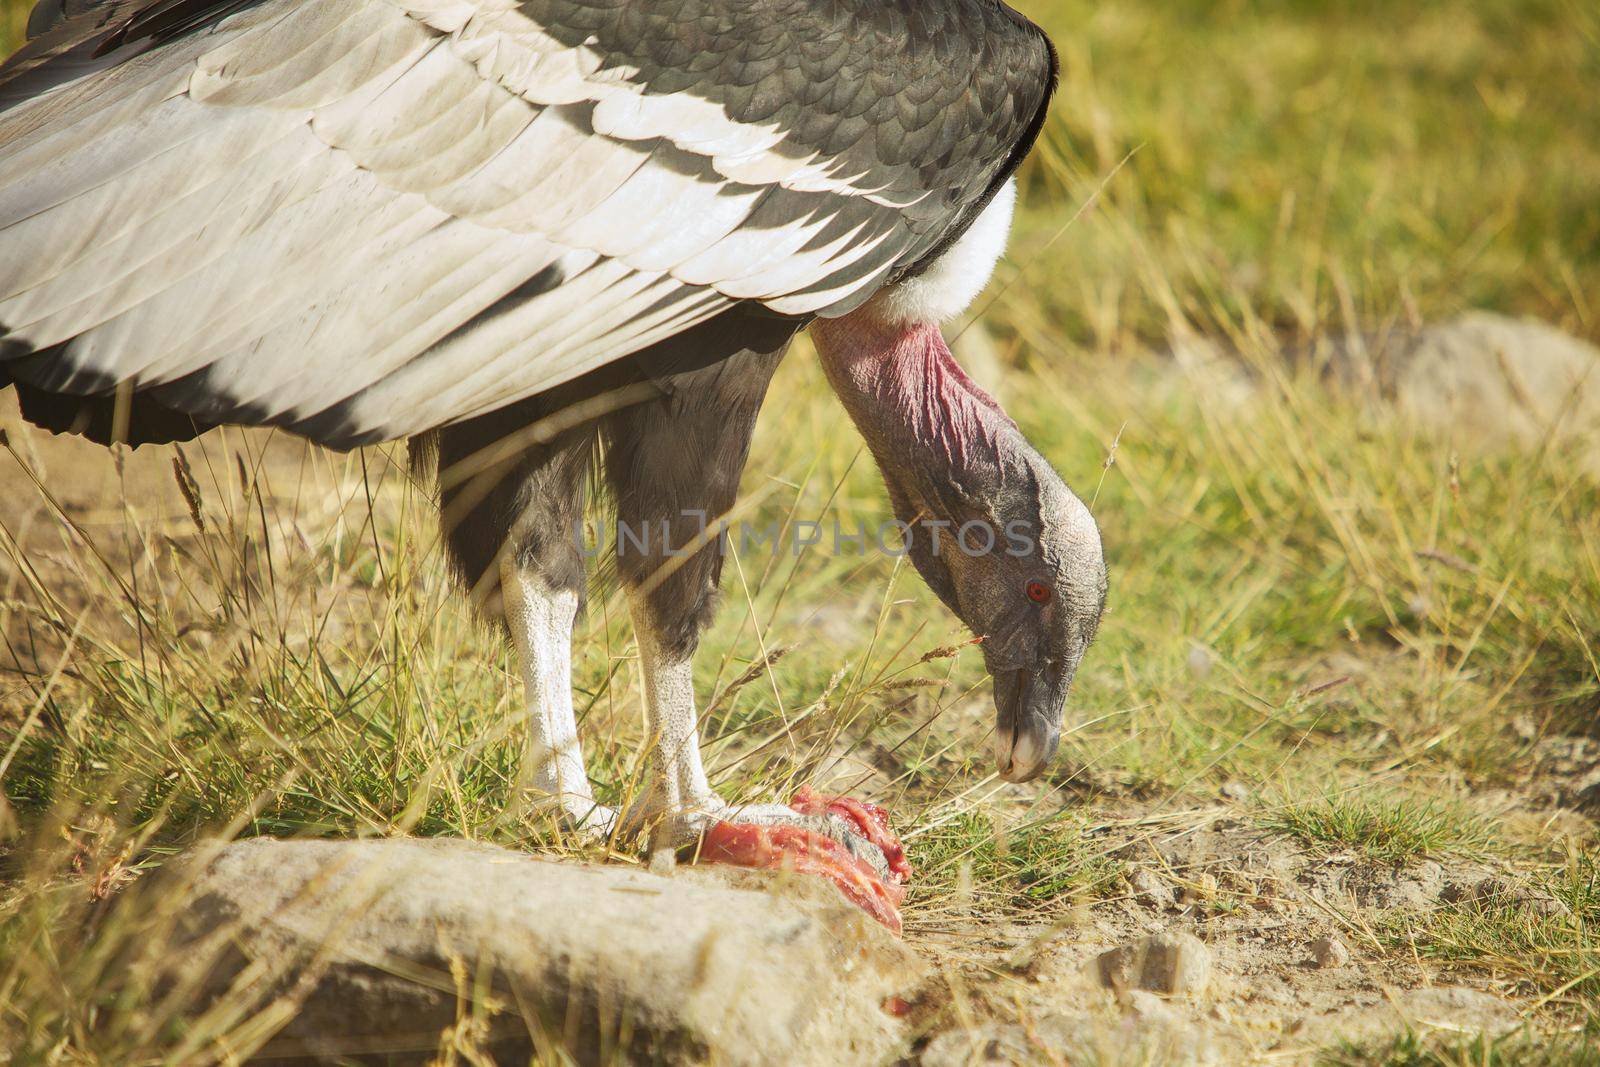 Condor Eating Lunch by wondry